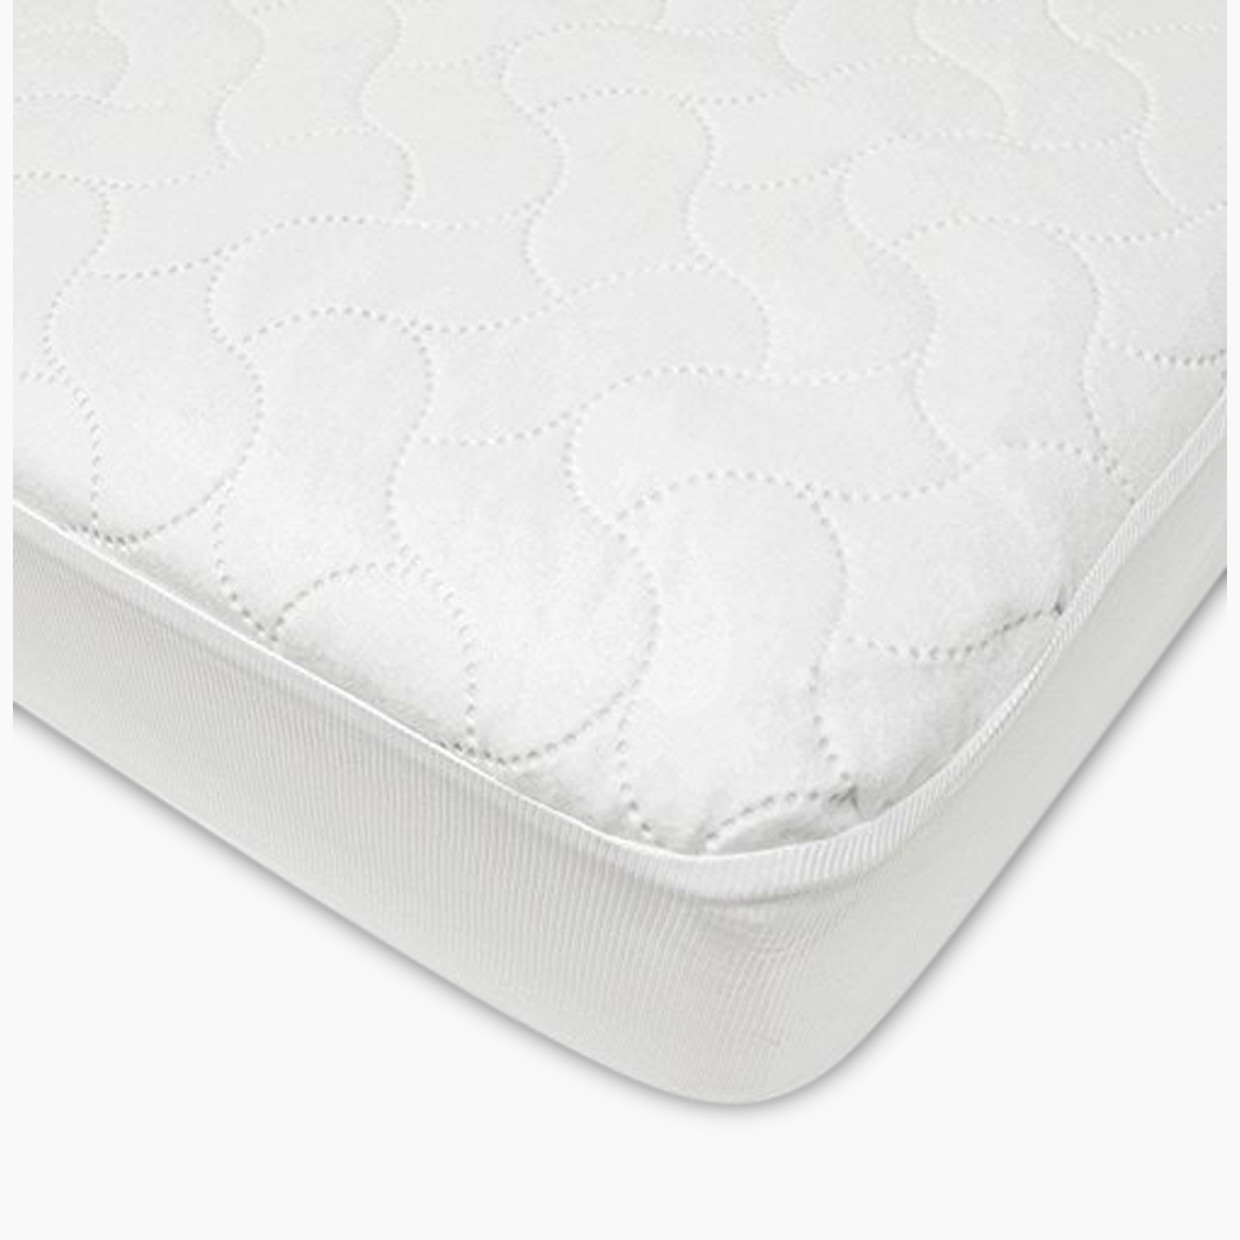 American Baby Company Fitted Waterproof Crib Mattress Pad Cover - White, 2 Pack.